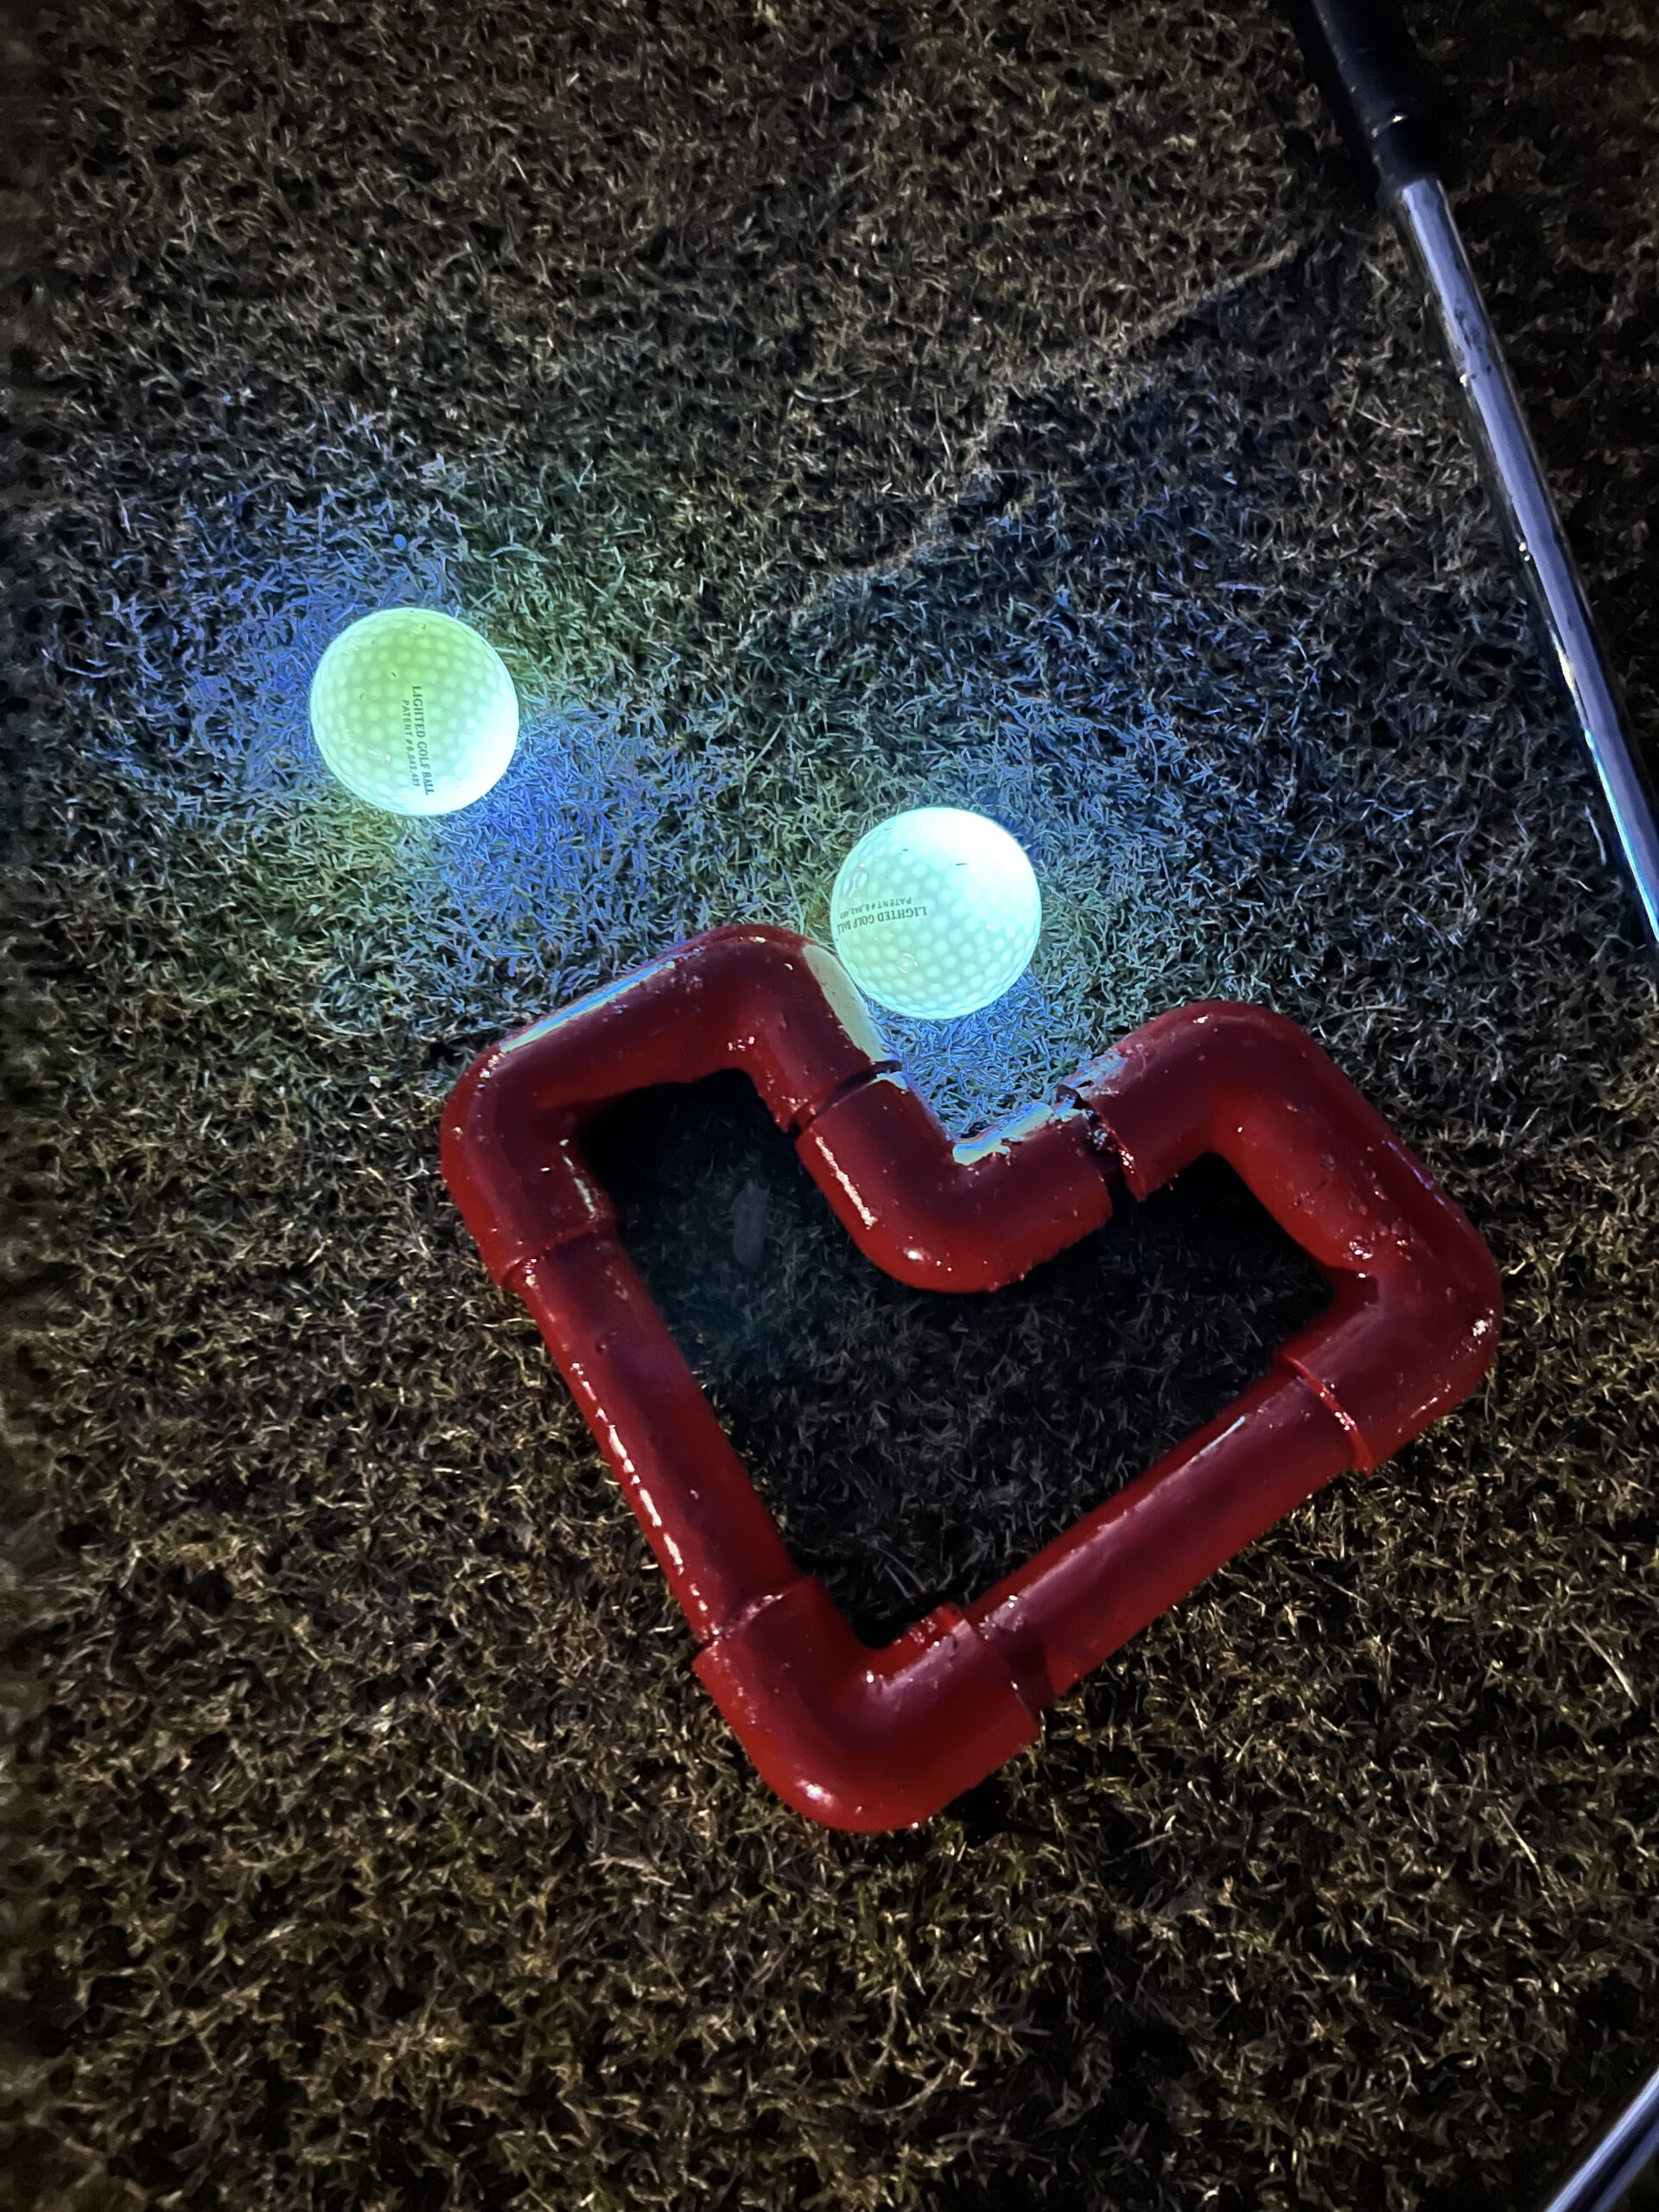 Heart shaped markers and glow in the dark balls on putting green for Hearts & Clubs event.